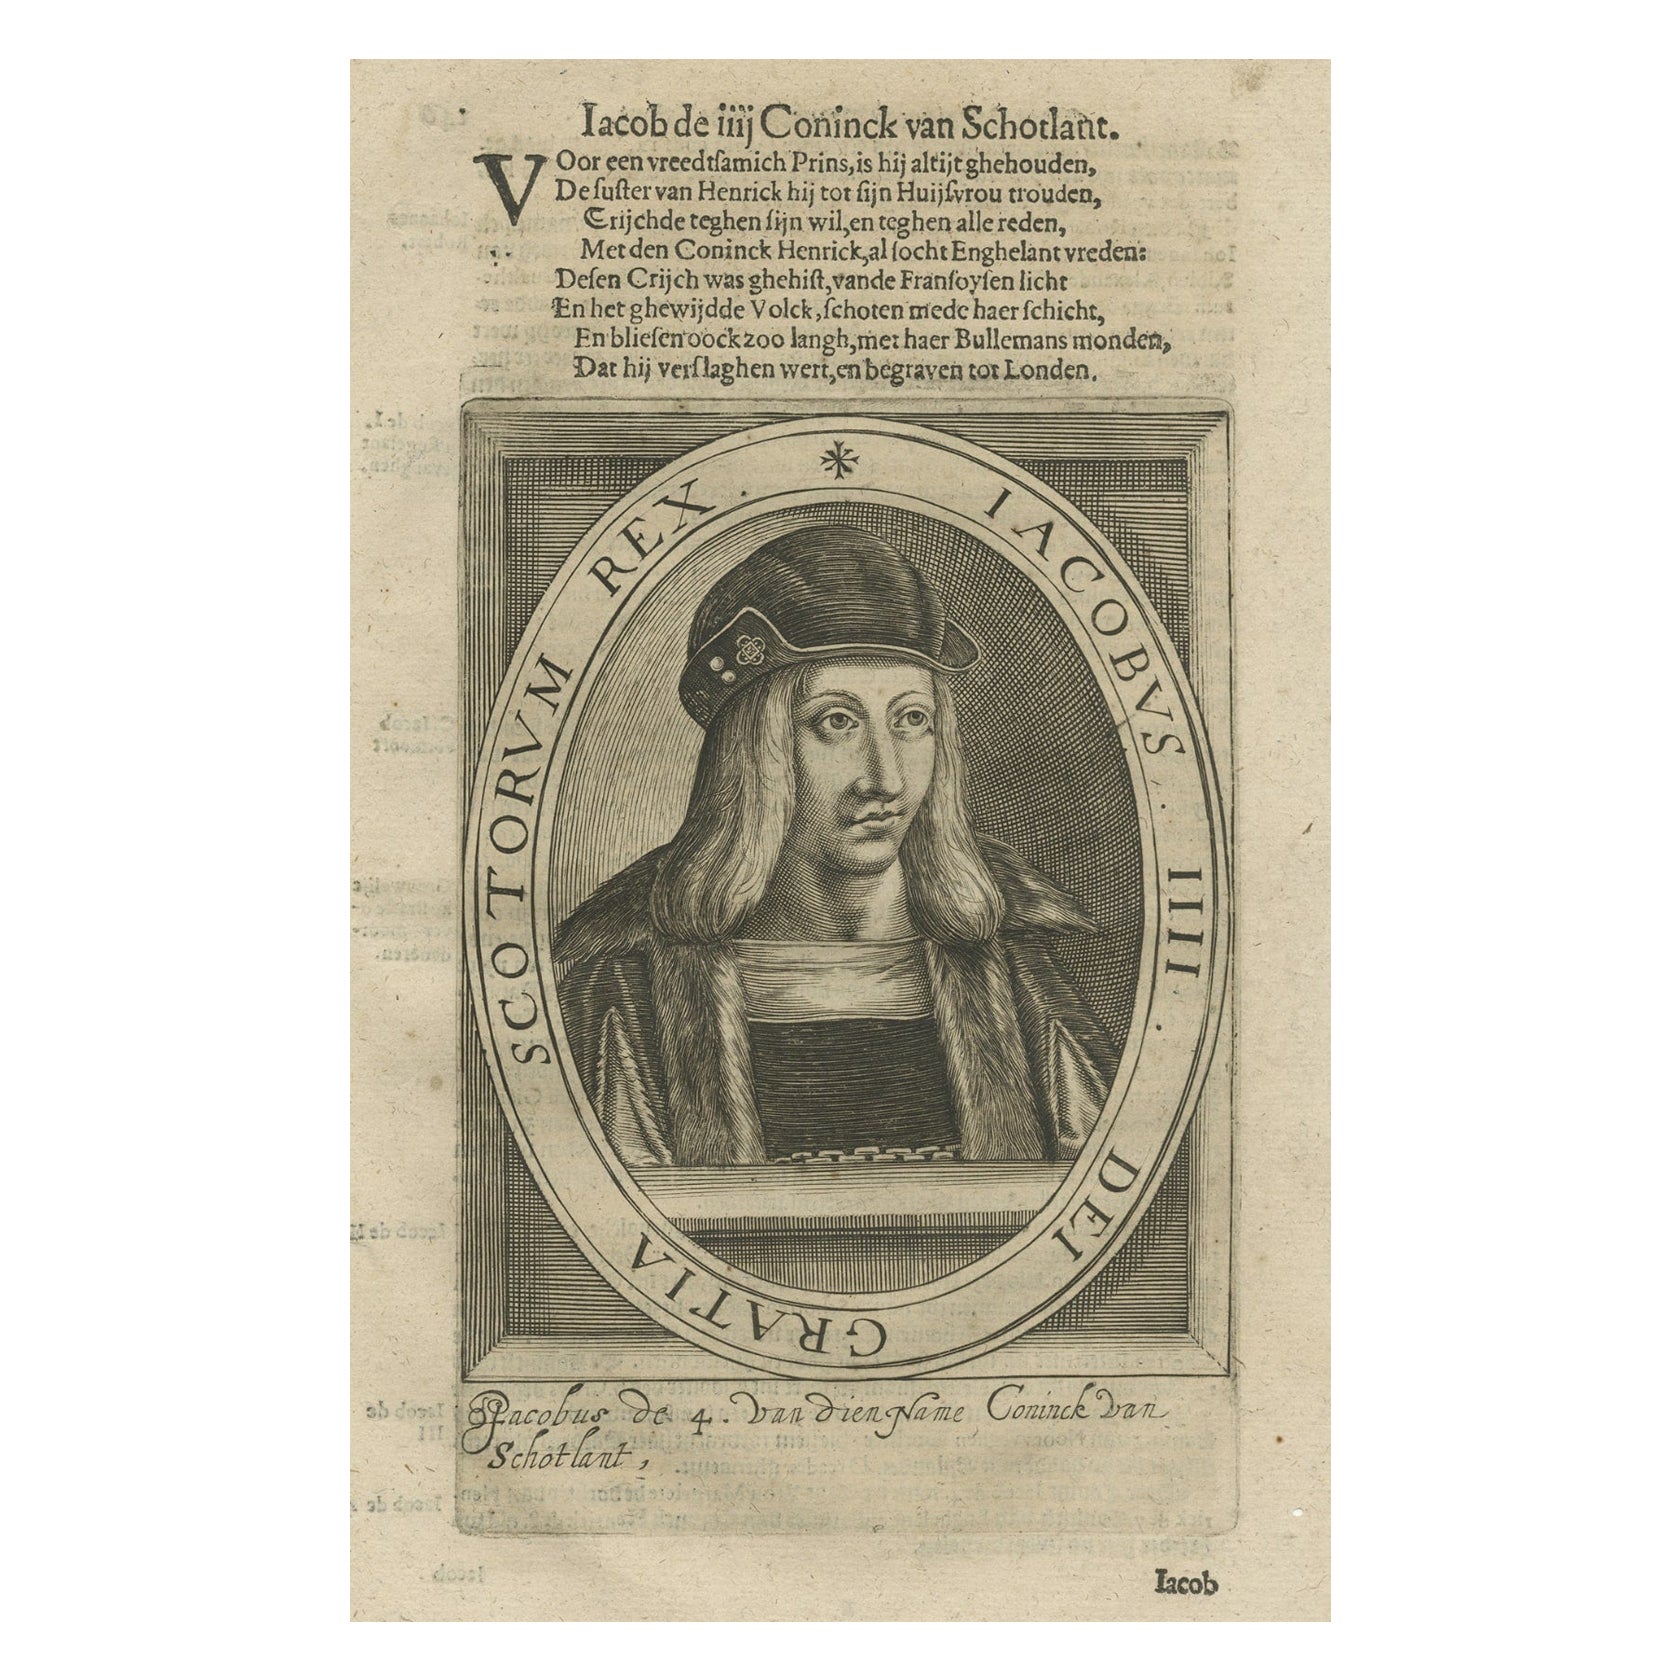 Antique Portrait of James IV, King of Scotland by Janszoon, 1615